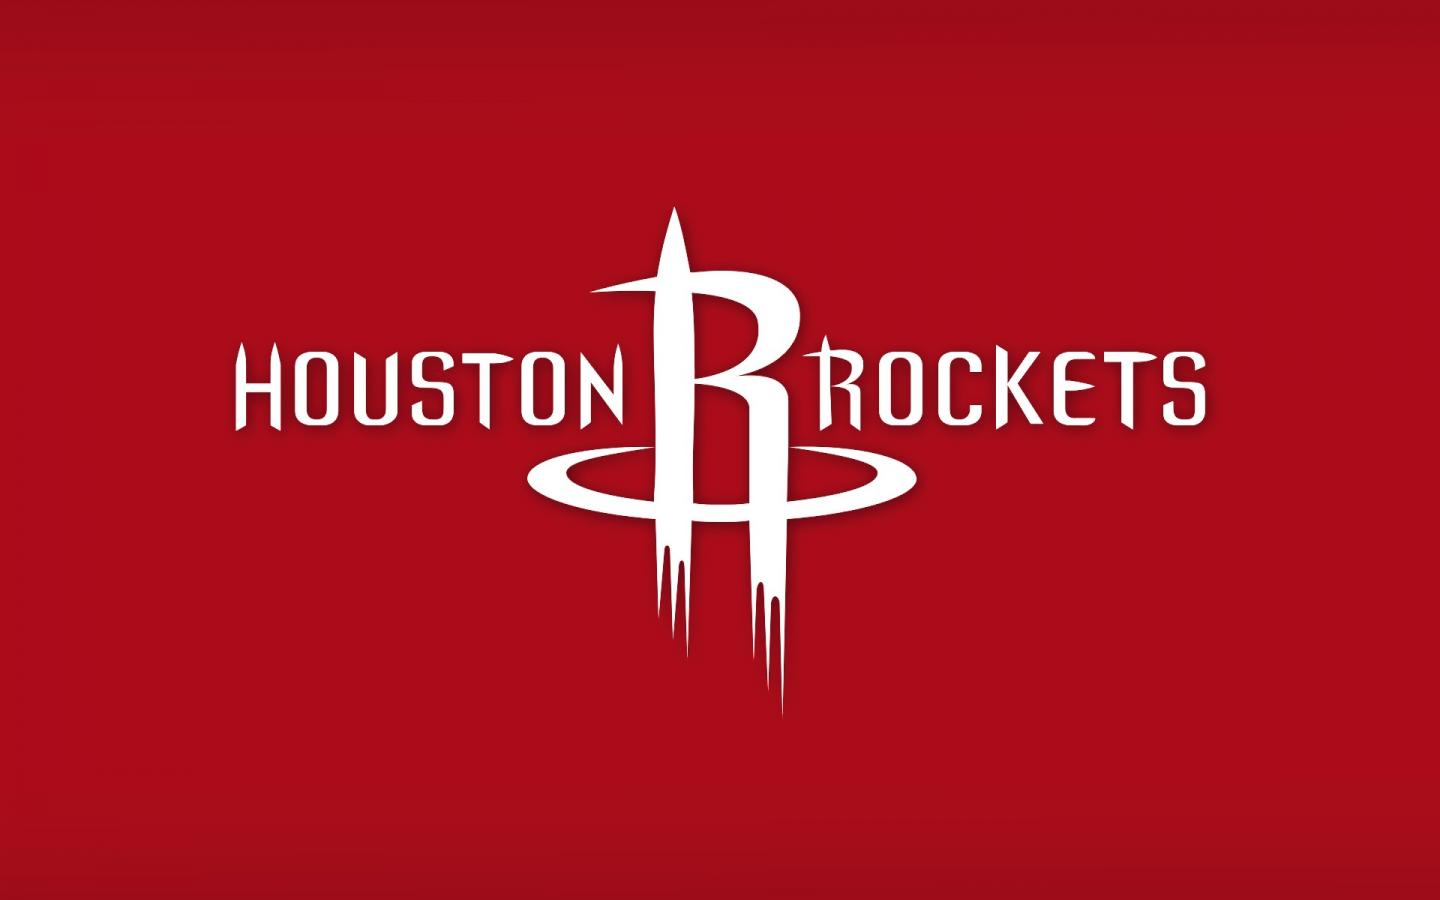 Presale Codes for Houston Rockets Playoff Tickets